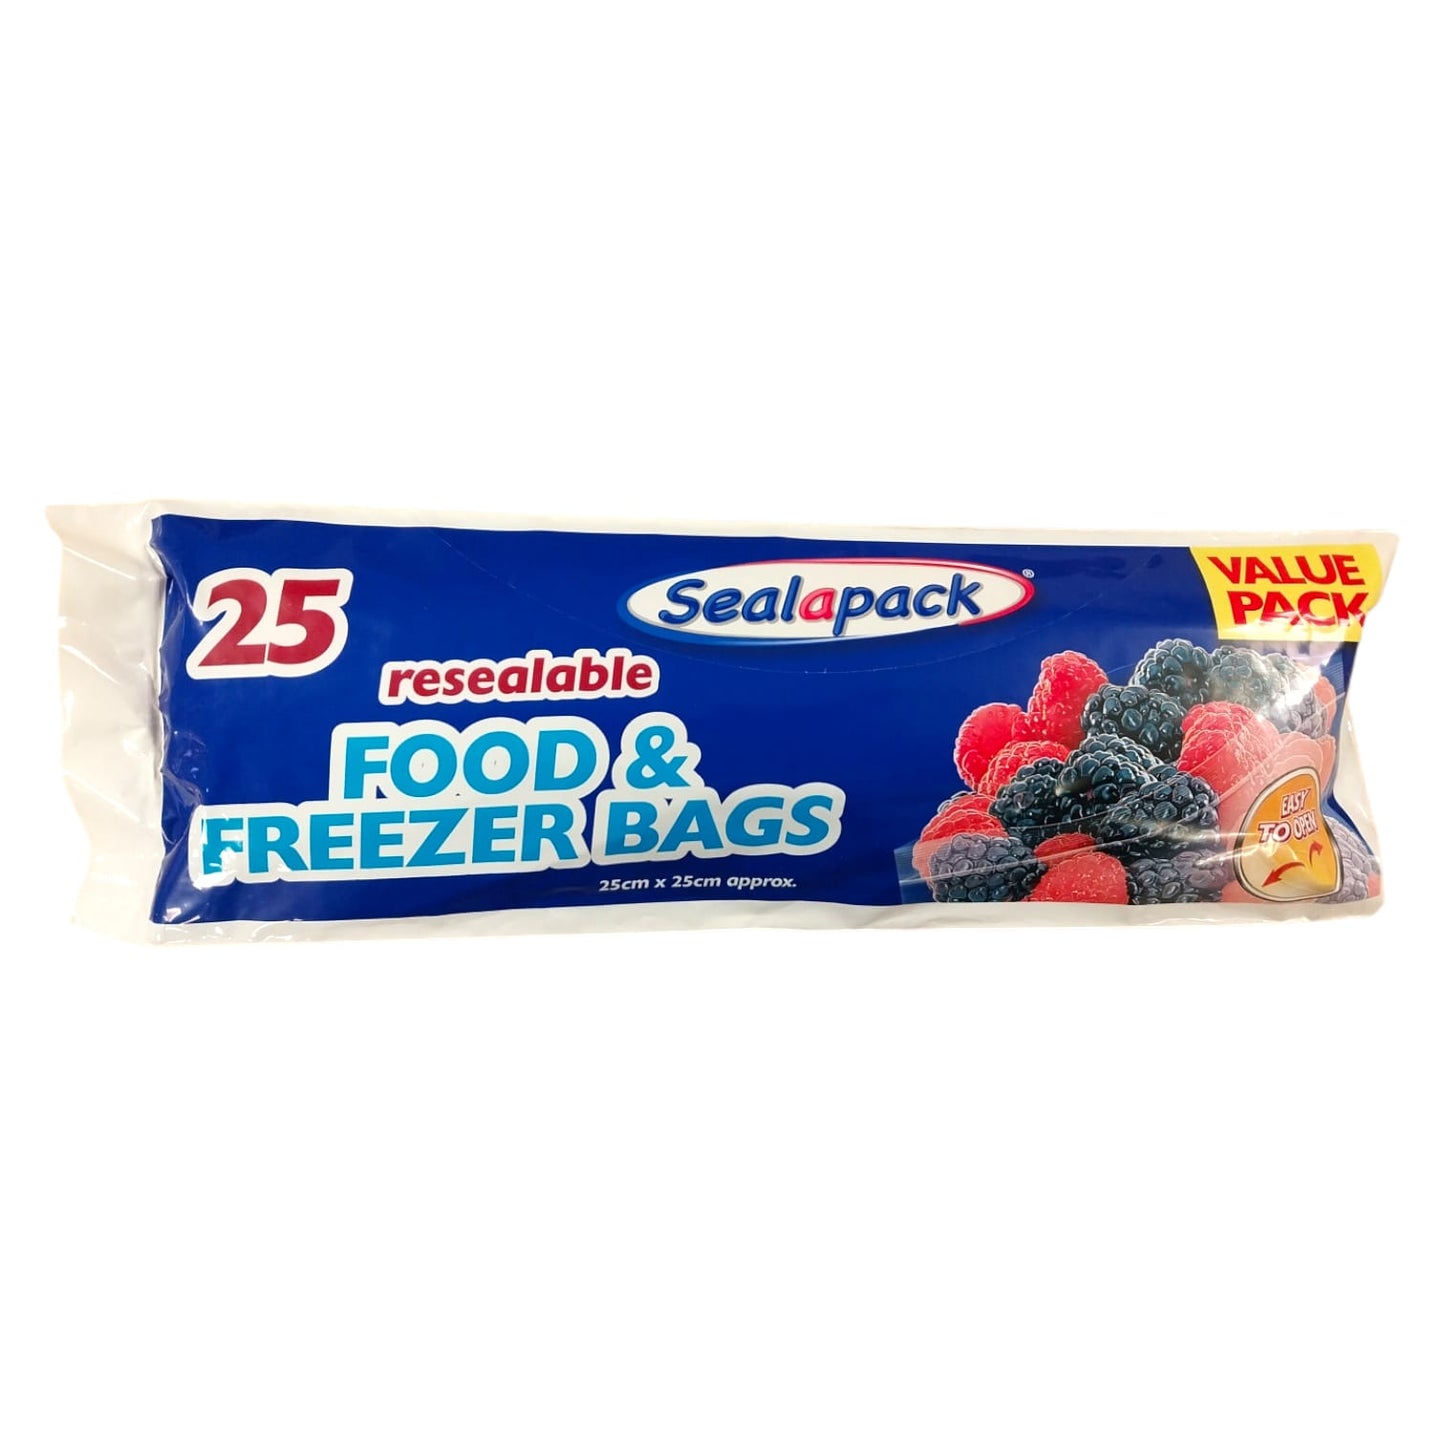 Pack of 25 Seal-A-Pack Food & Freezer Bags